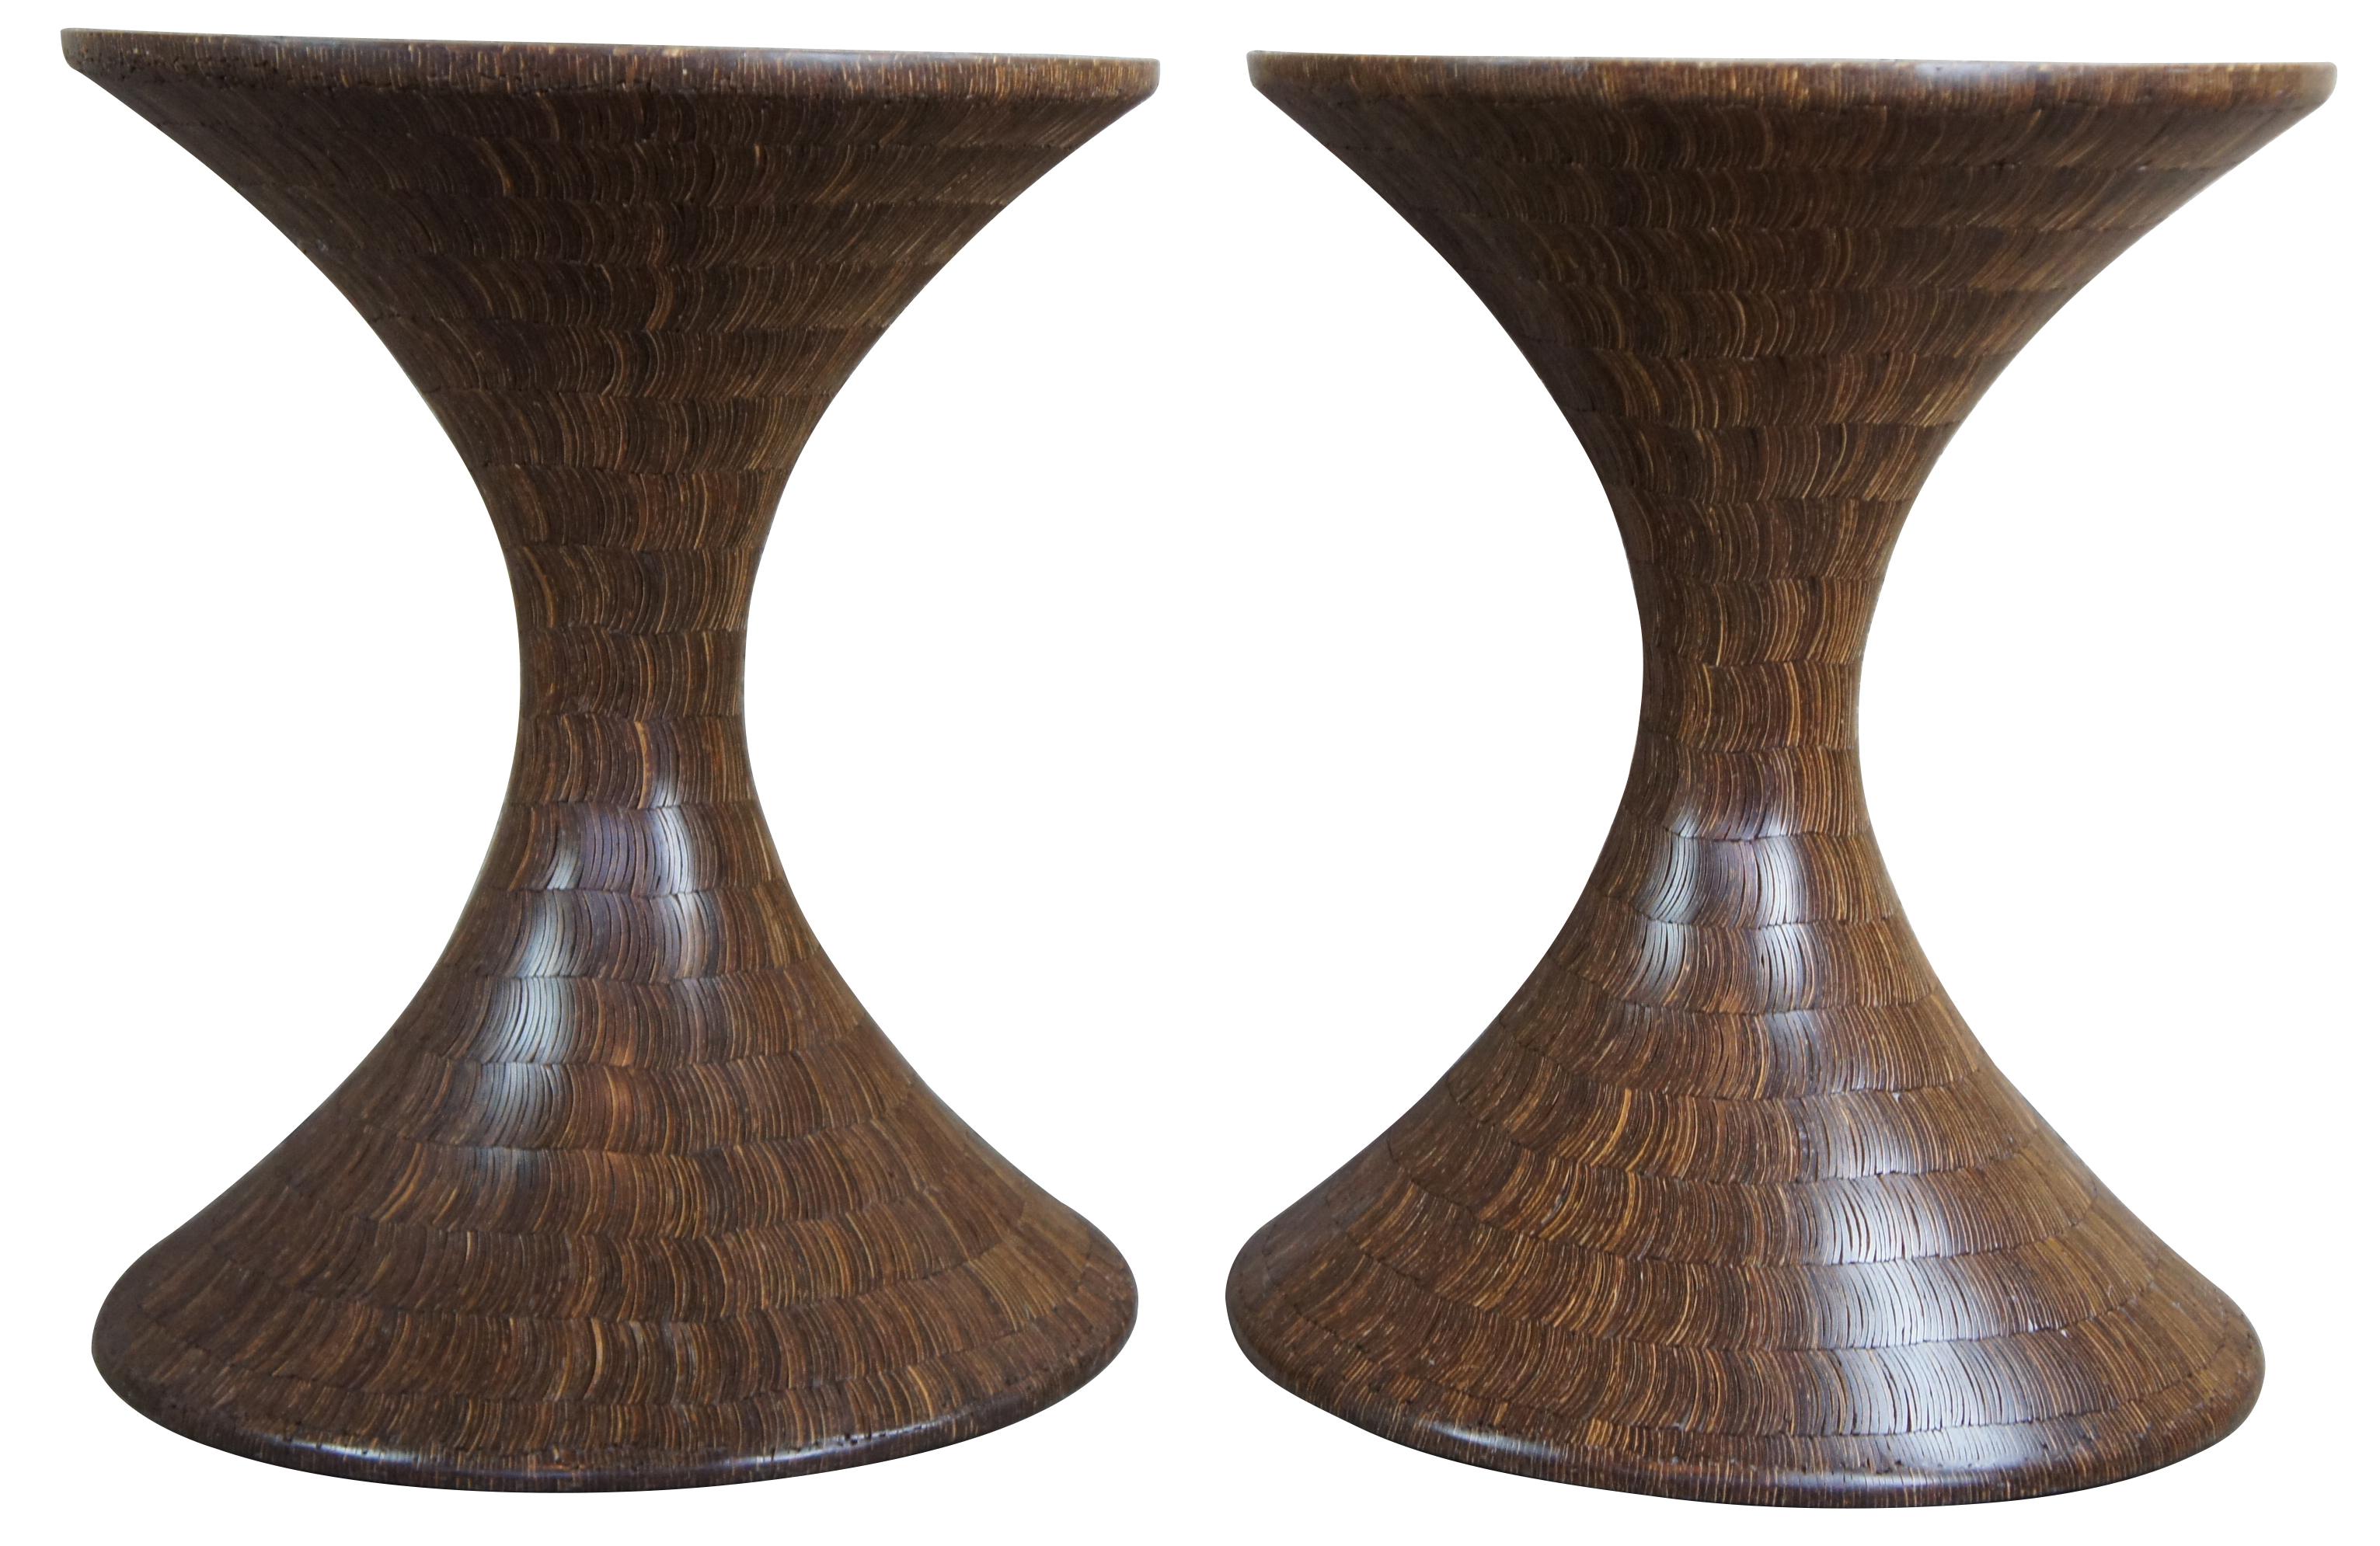 2 Mid-Century Modern Hourglass shaped sculptural pedestal side tables boho chic

Unique pair of hourglass shaped pedestals or side tables. Each is made from inlaid slivers that are patterned in a swirl shape and lead to a painted top, affixed with